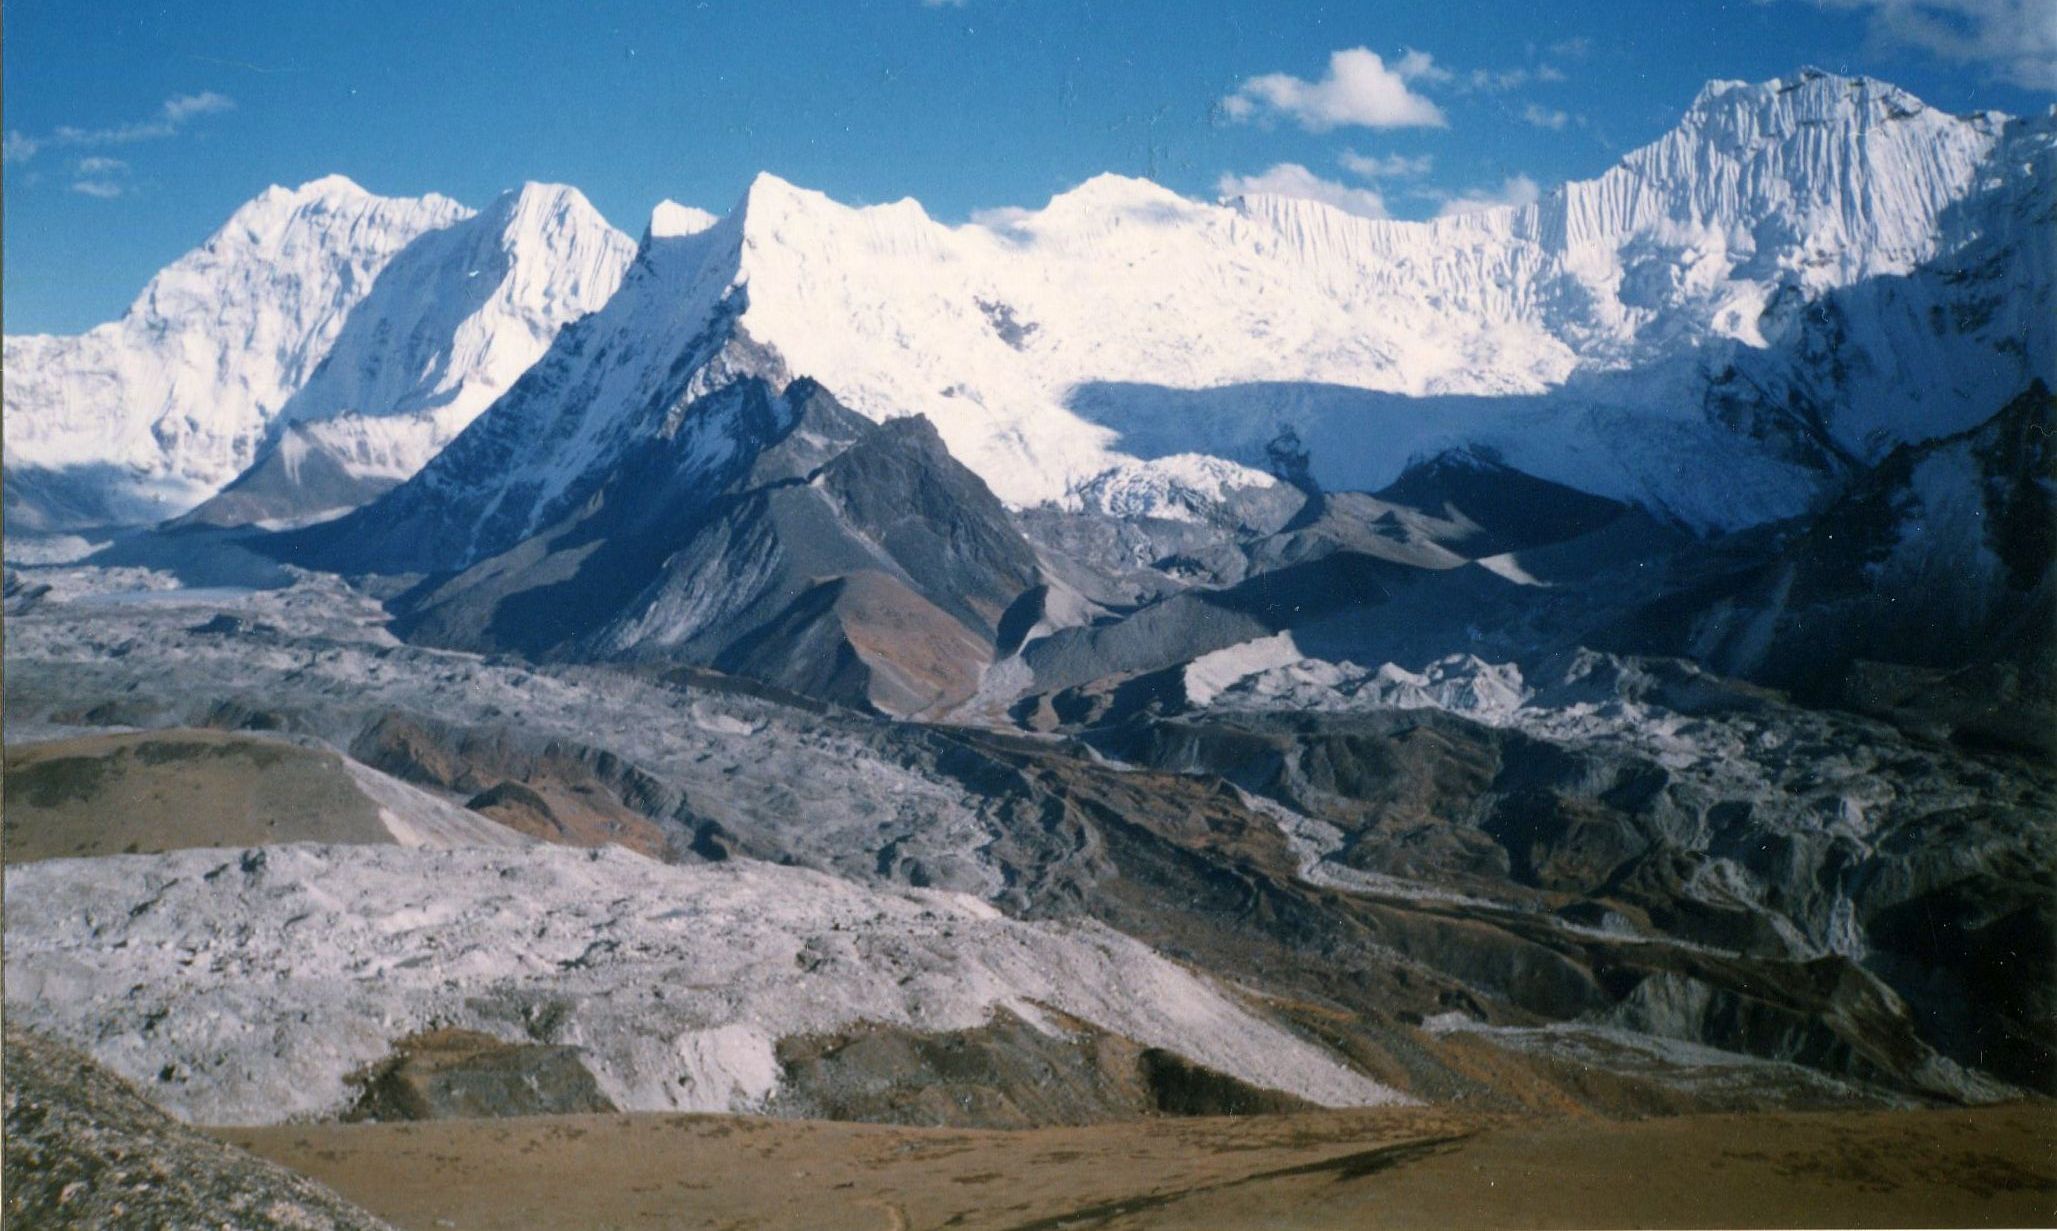 Peaks above Chukhung Valley